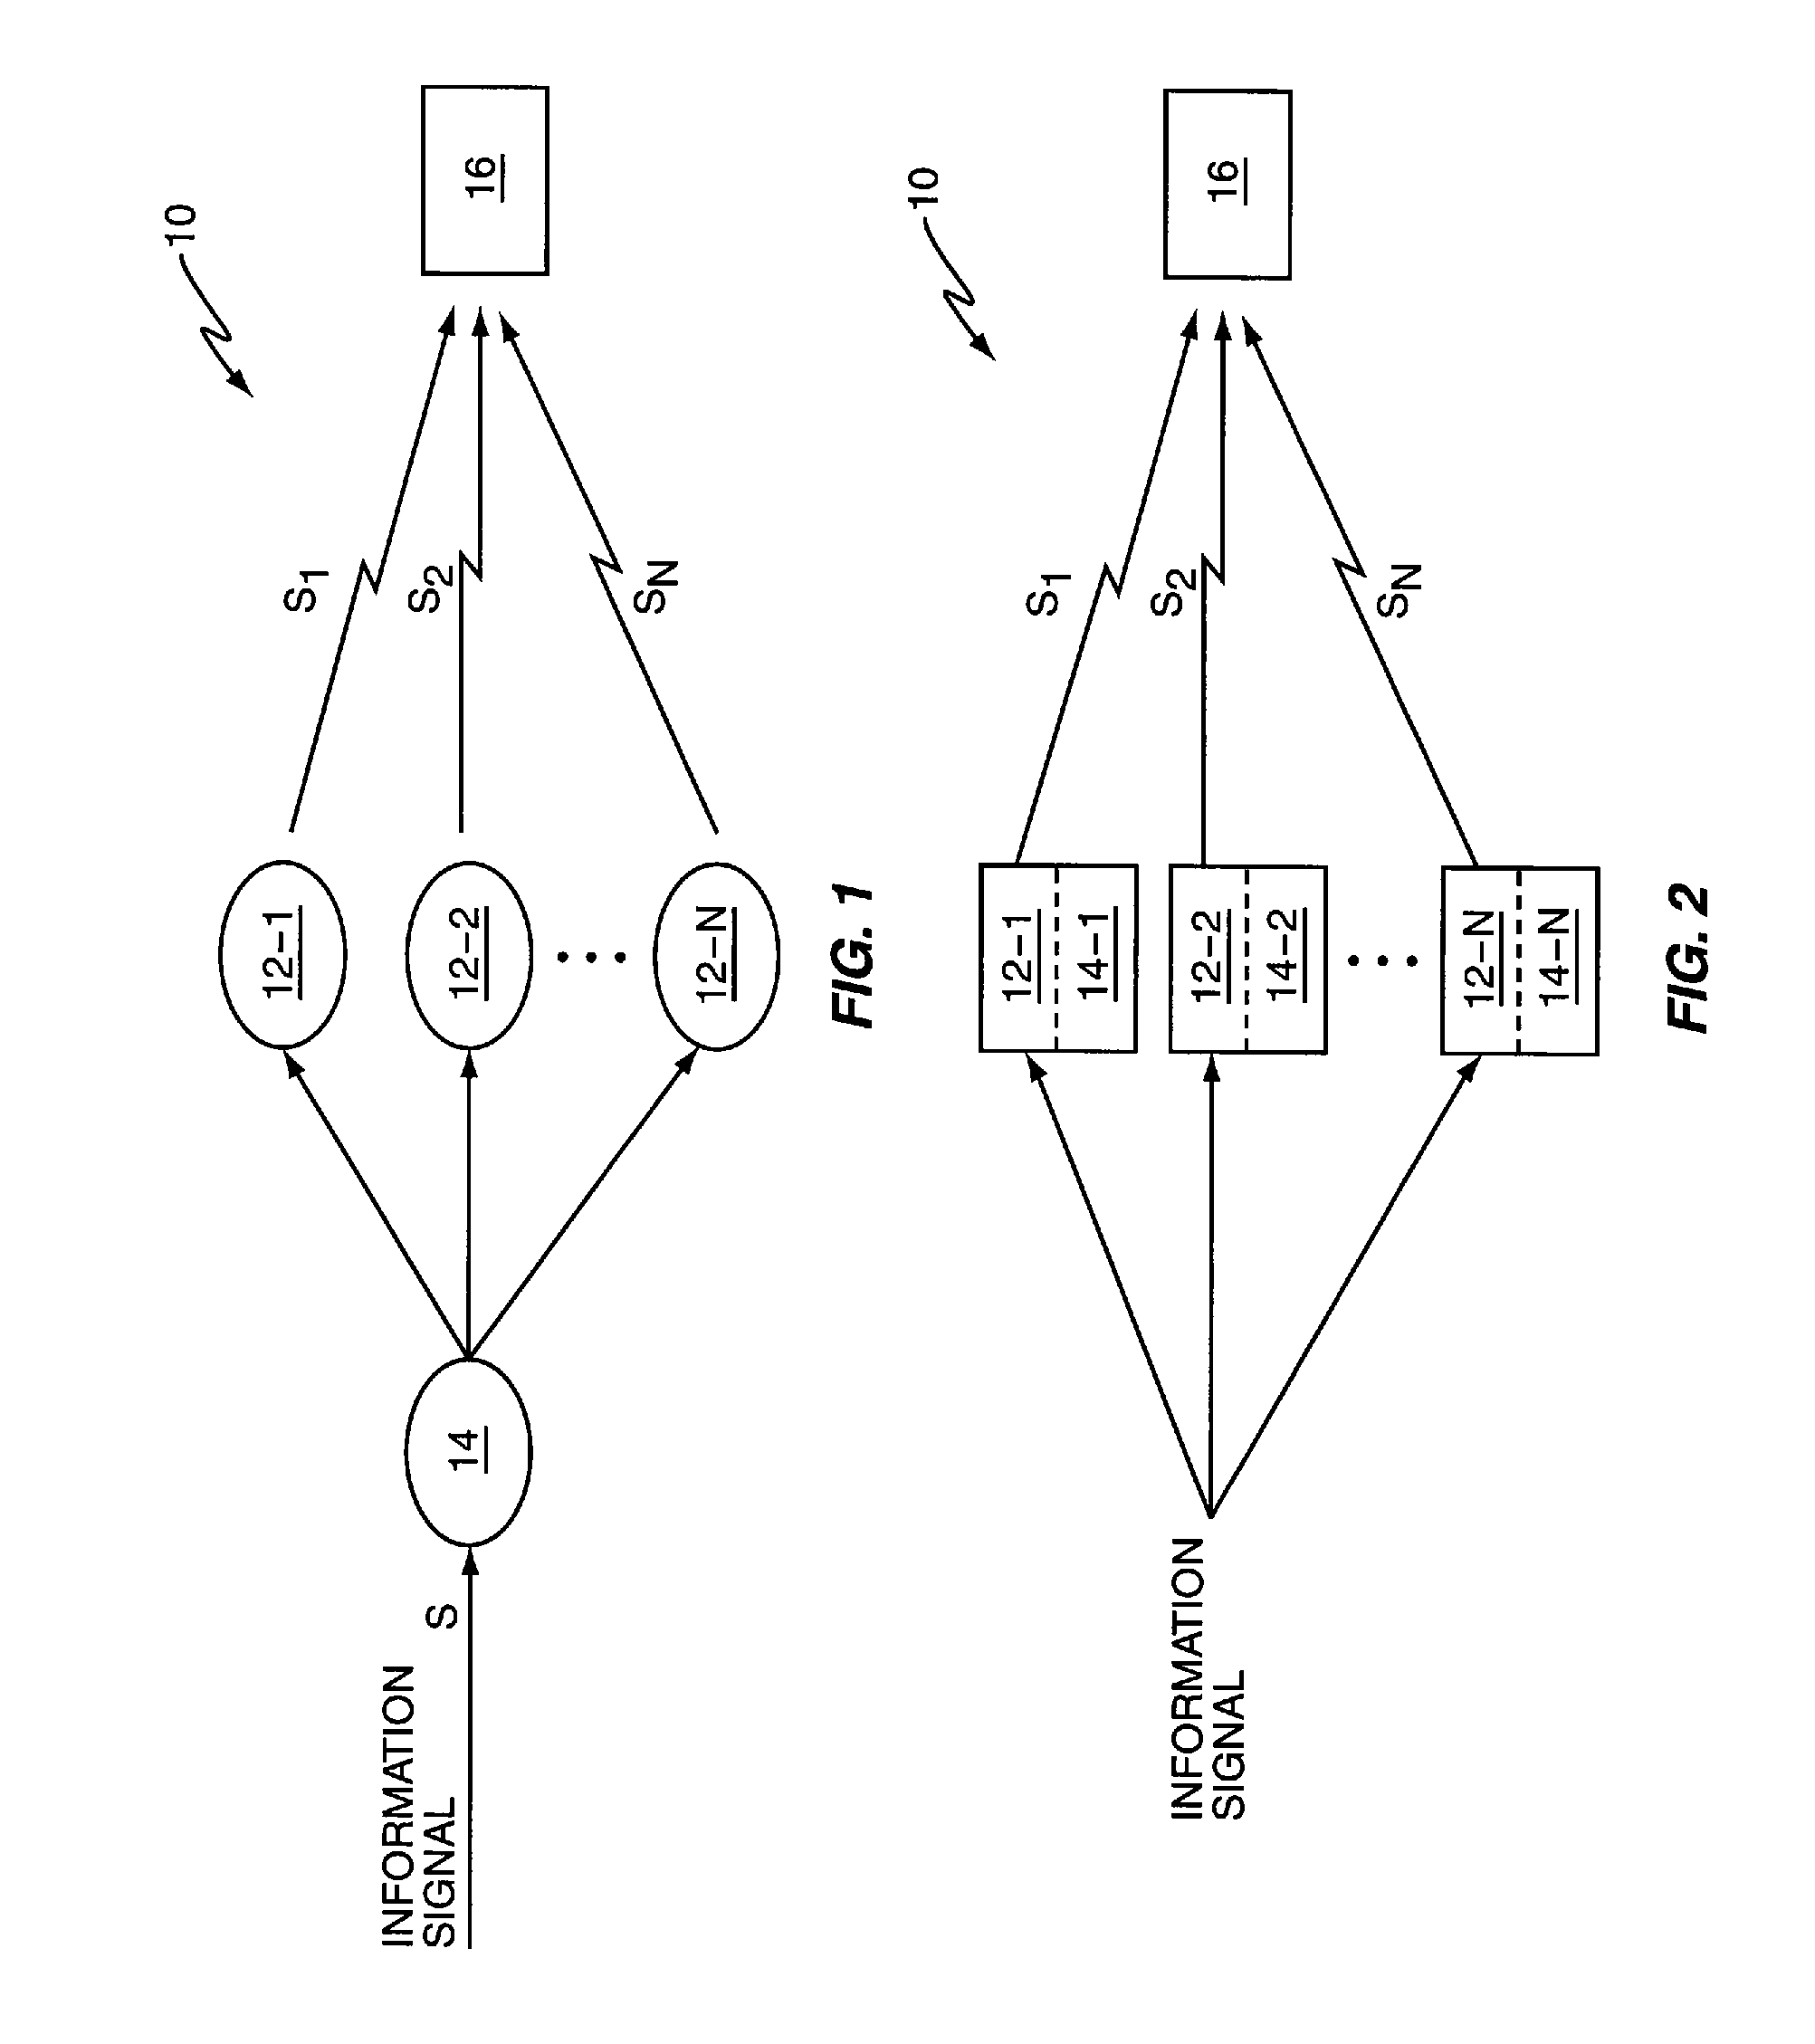 Distributed transmit diversity in a wireless communication network